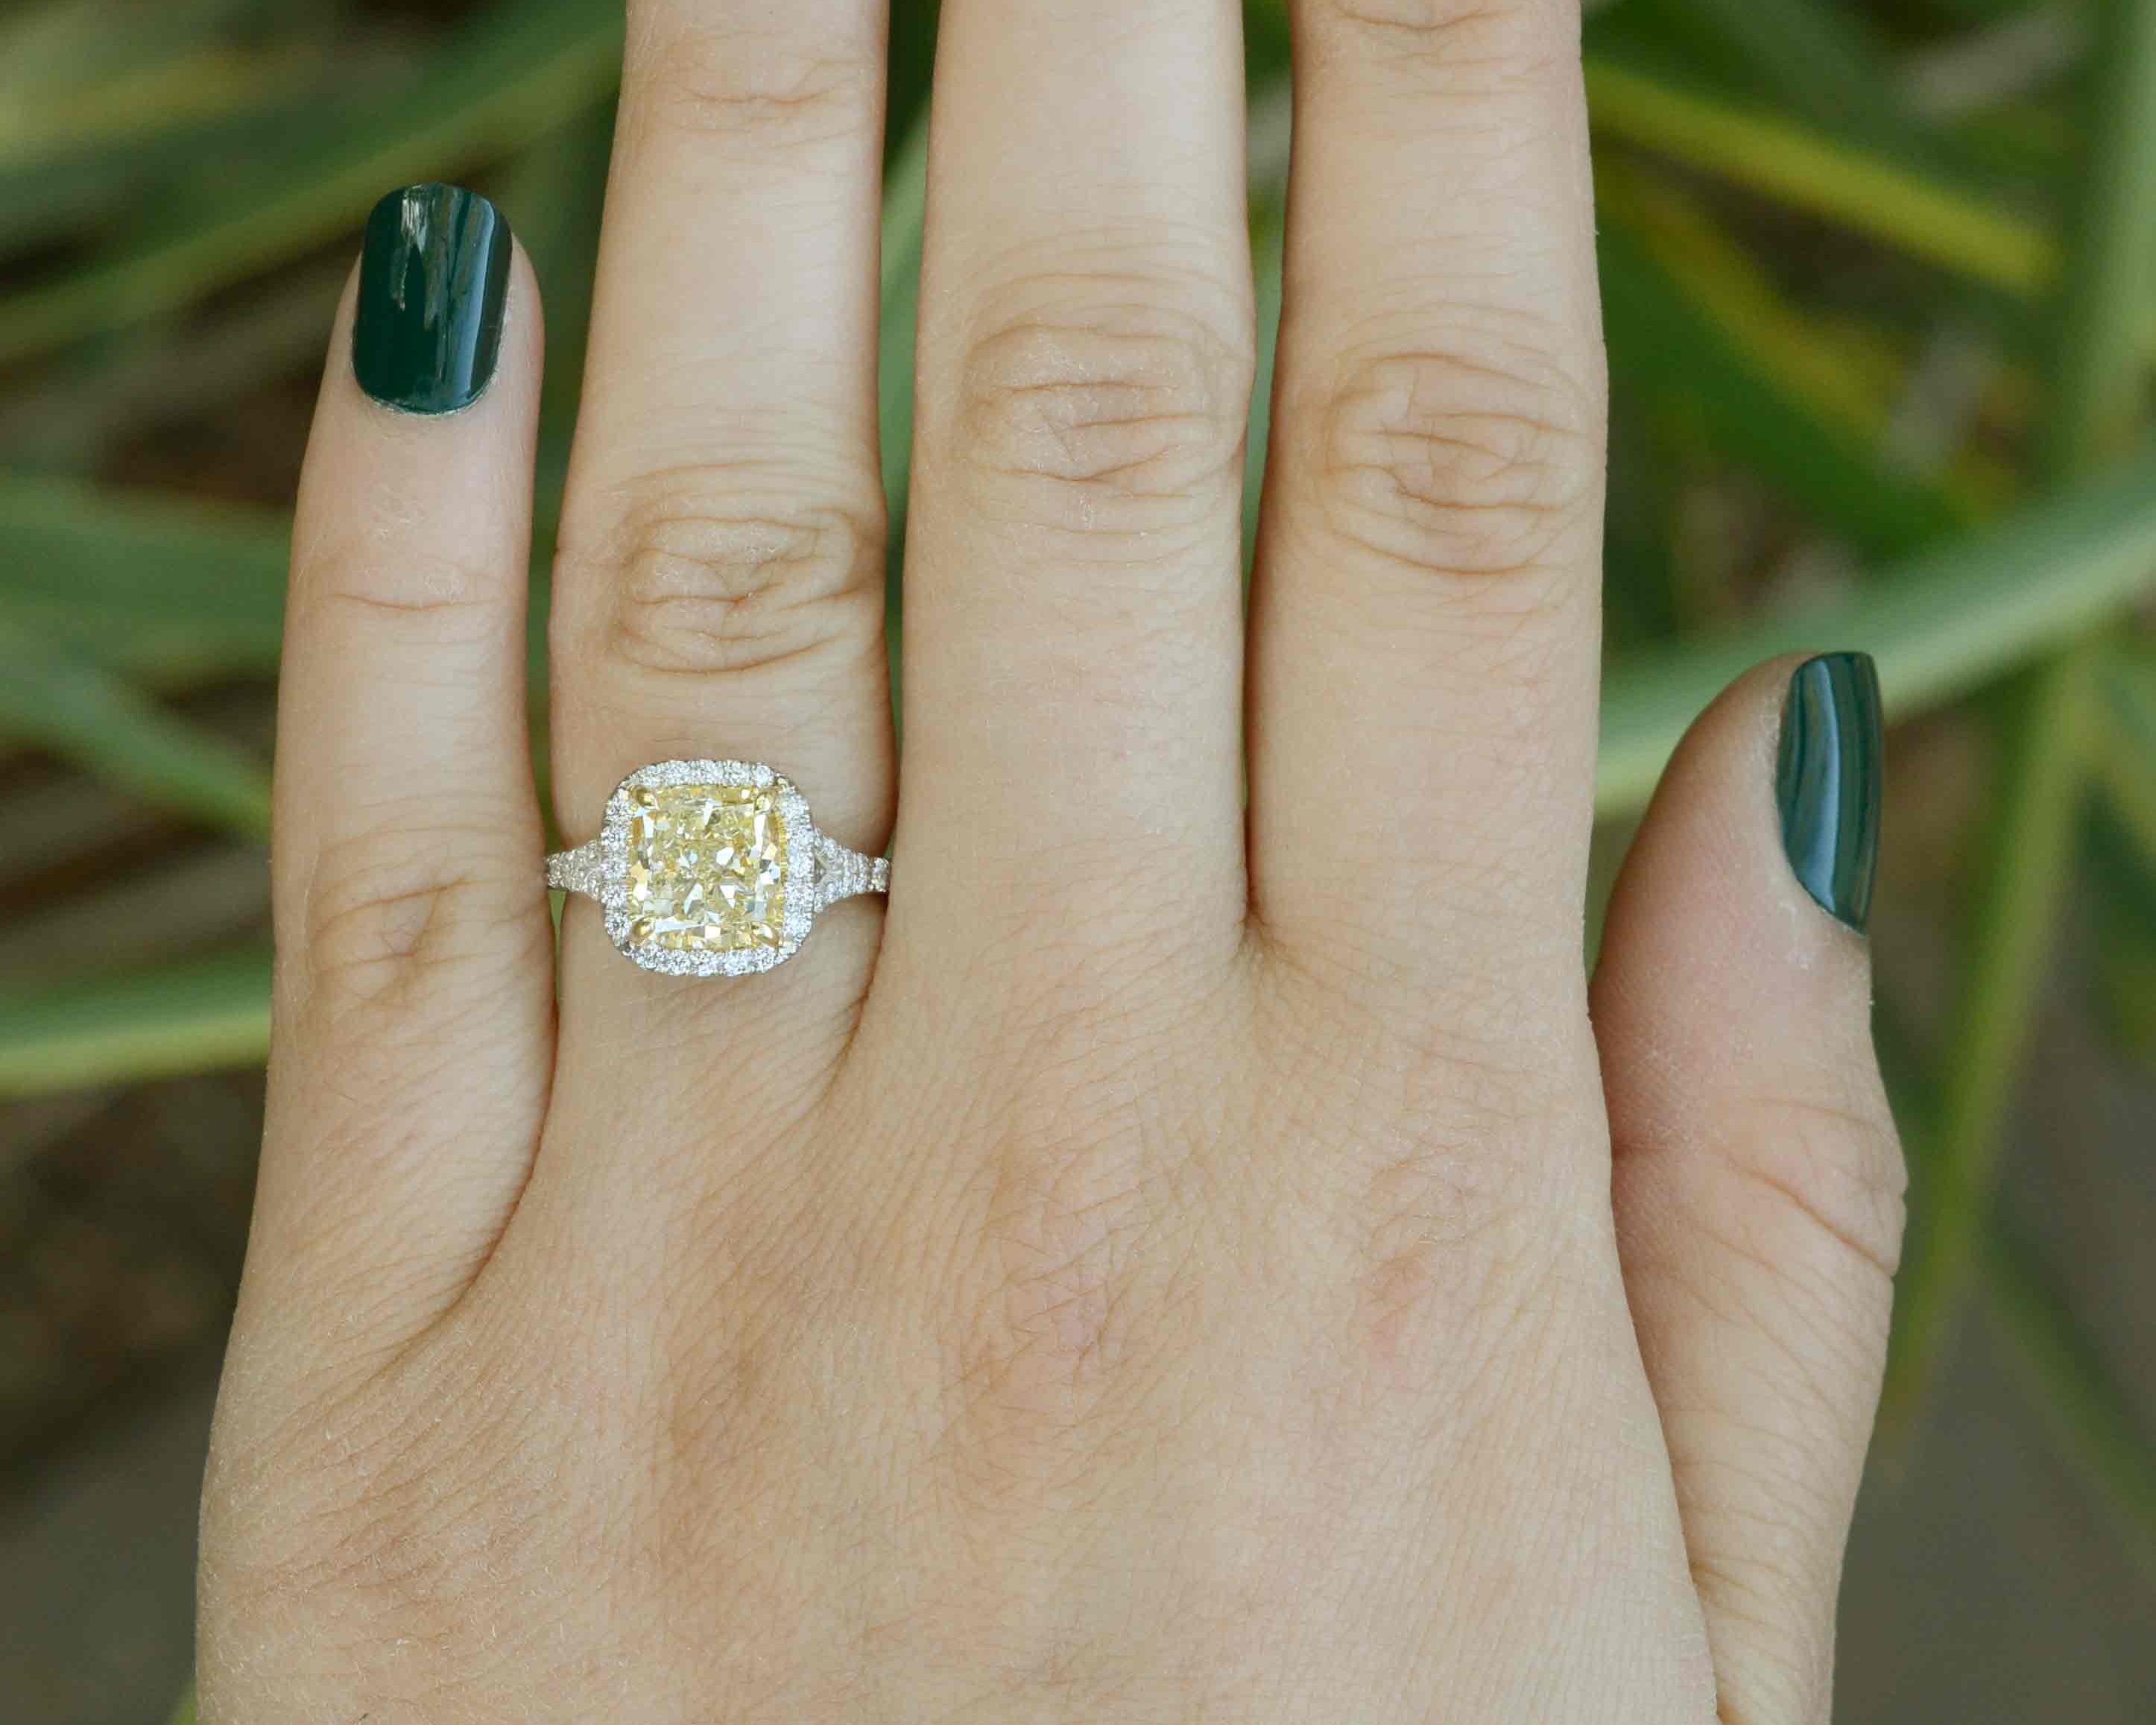 The 3.14 carat yellow diamond displays w - x color with vs2 clarity in this modern engagement ring.